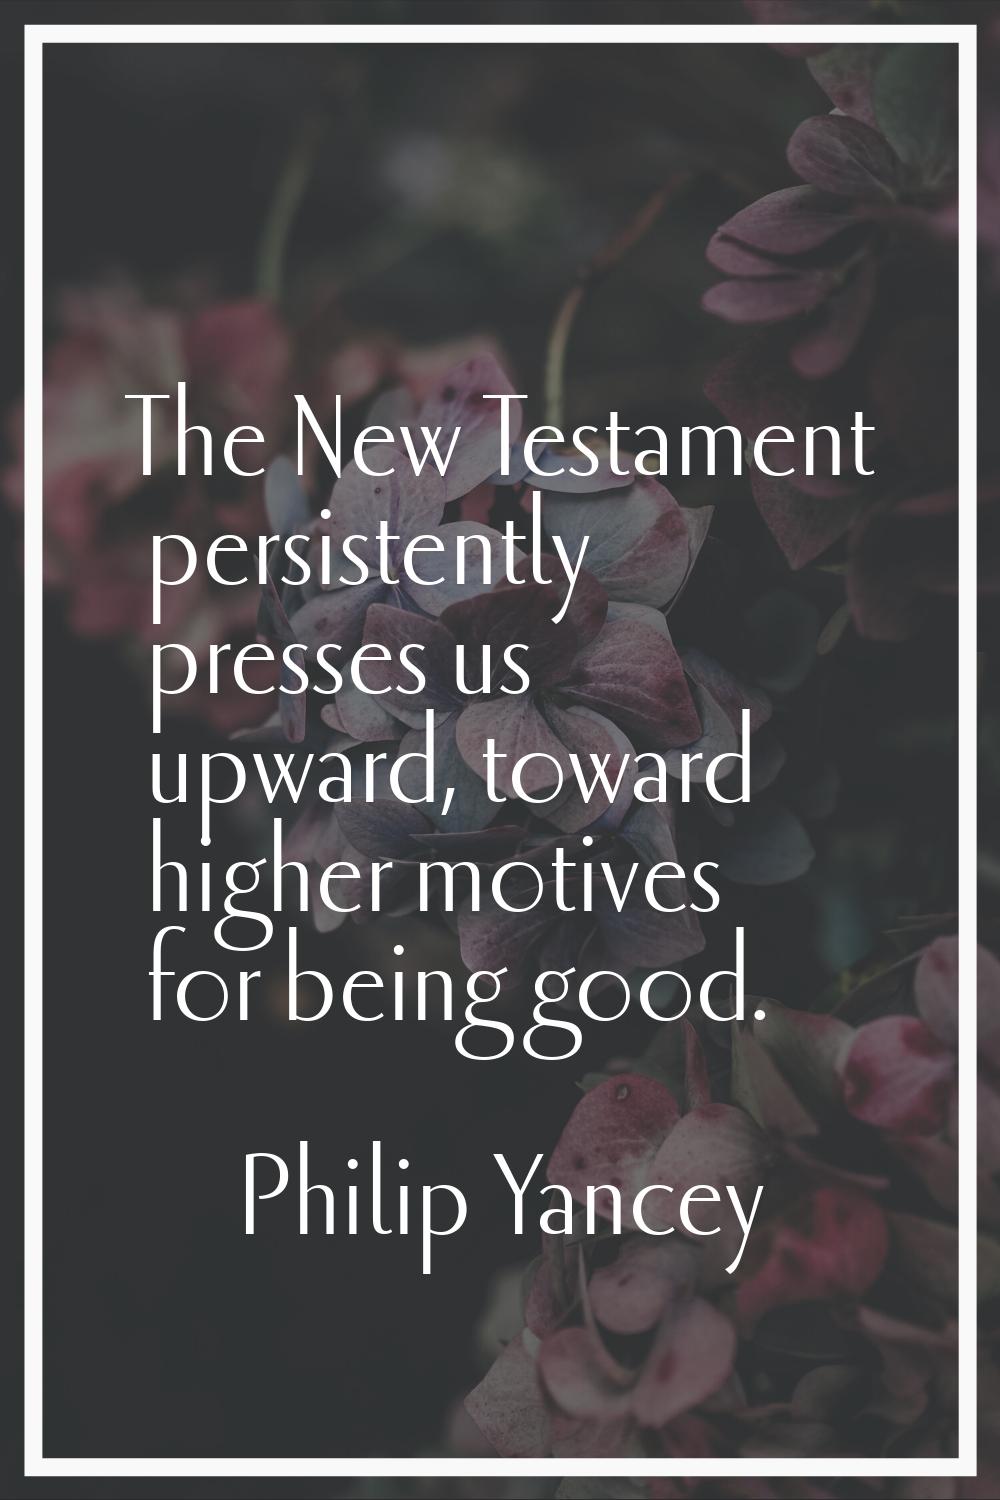 The New Testament persistently presses us upward, toward higher motives for being good.